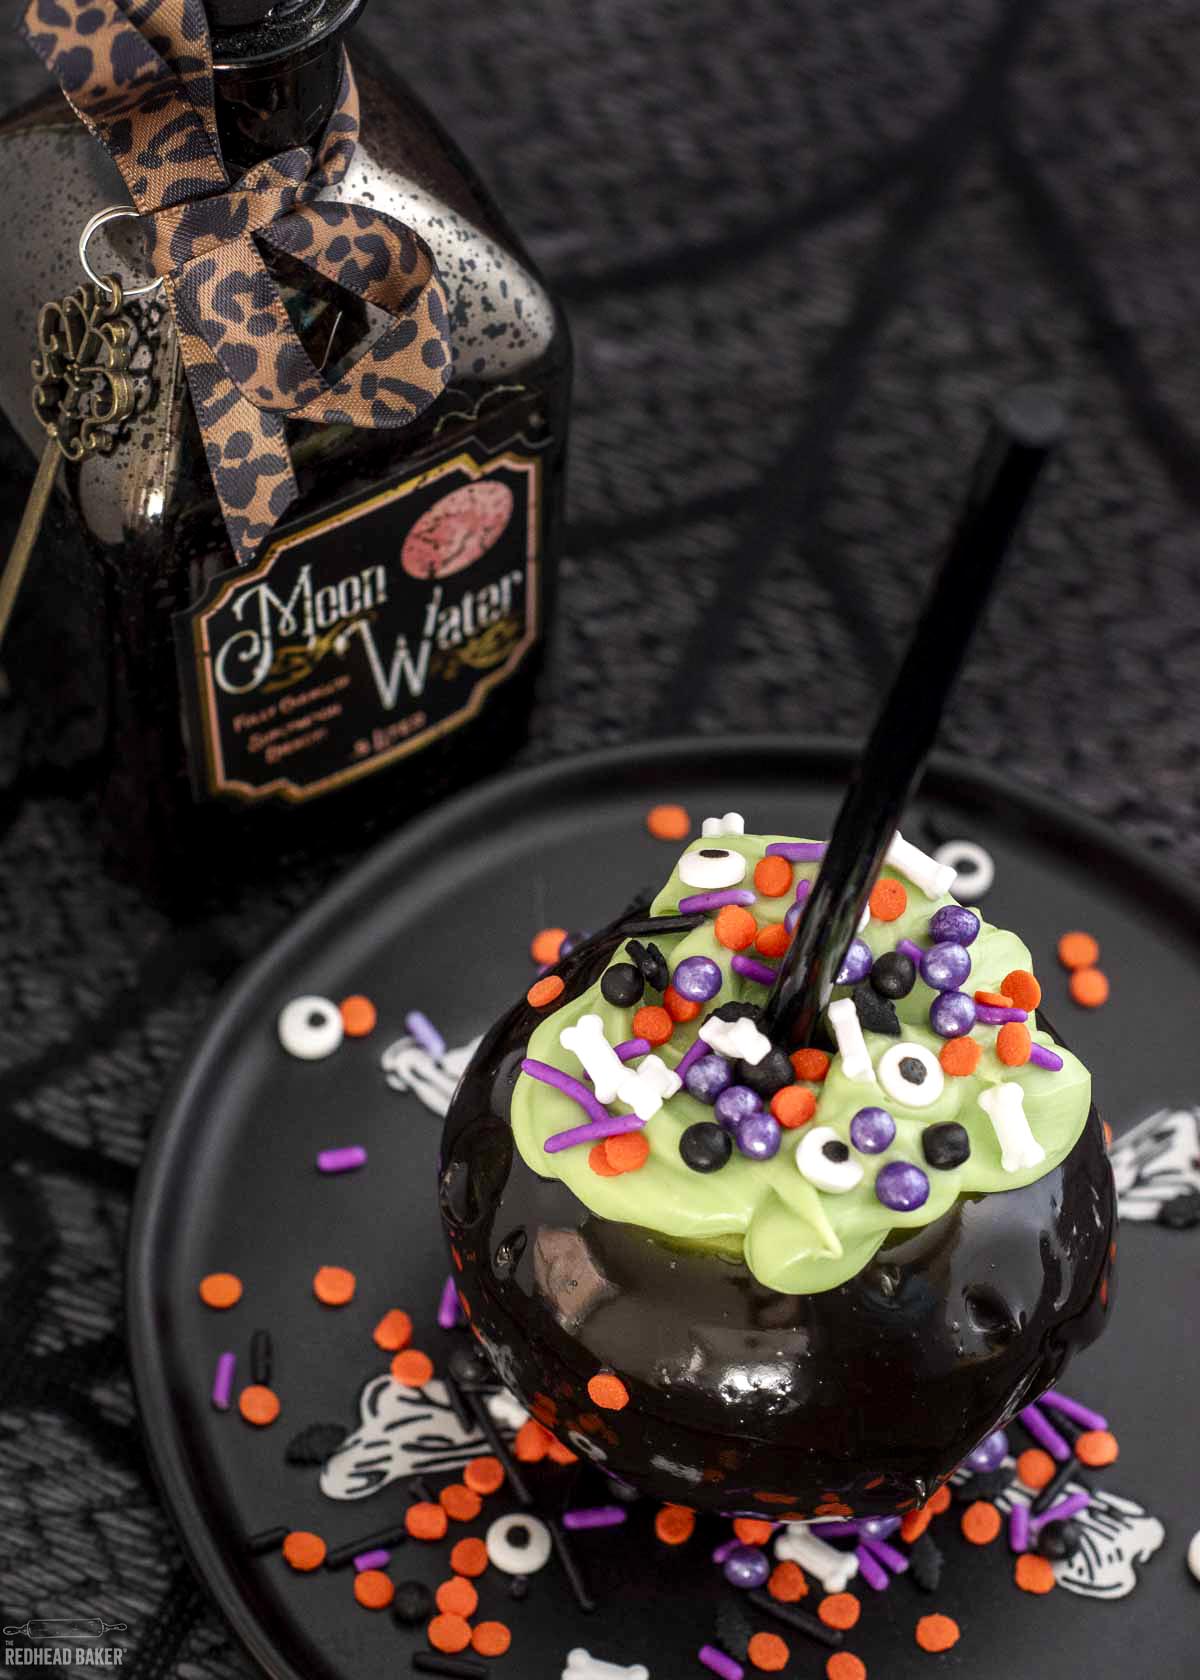 A cauldron caramel apple on a black plate in front of a bottle labeled "Moon Water".